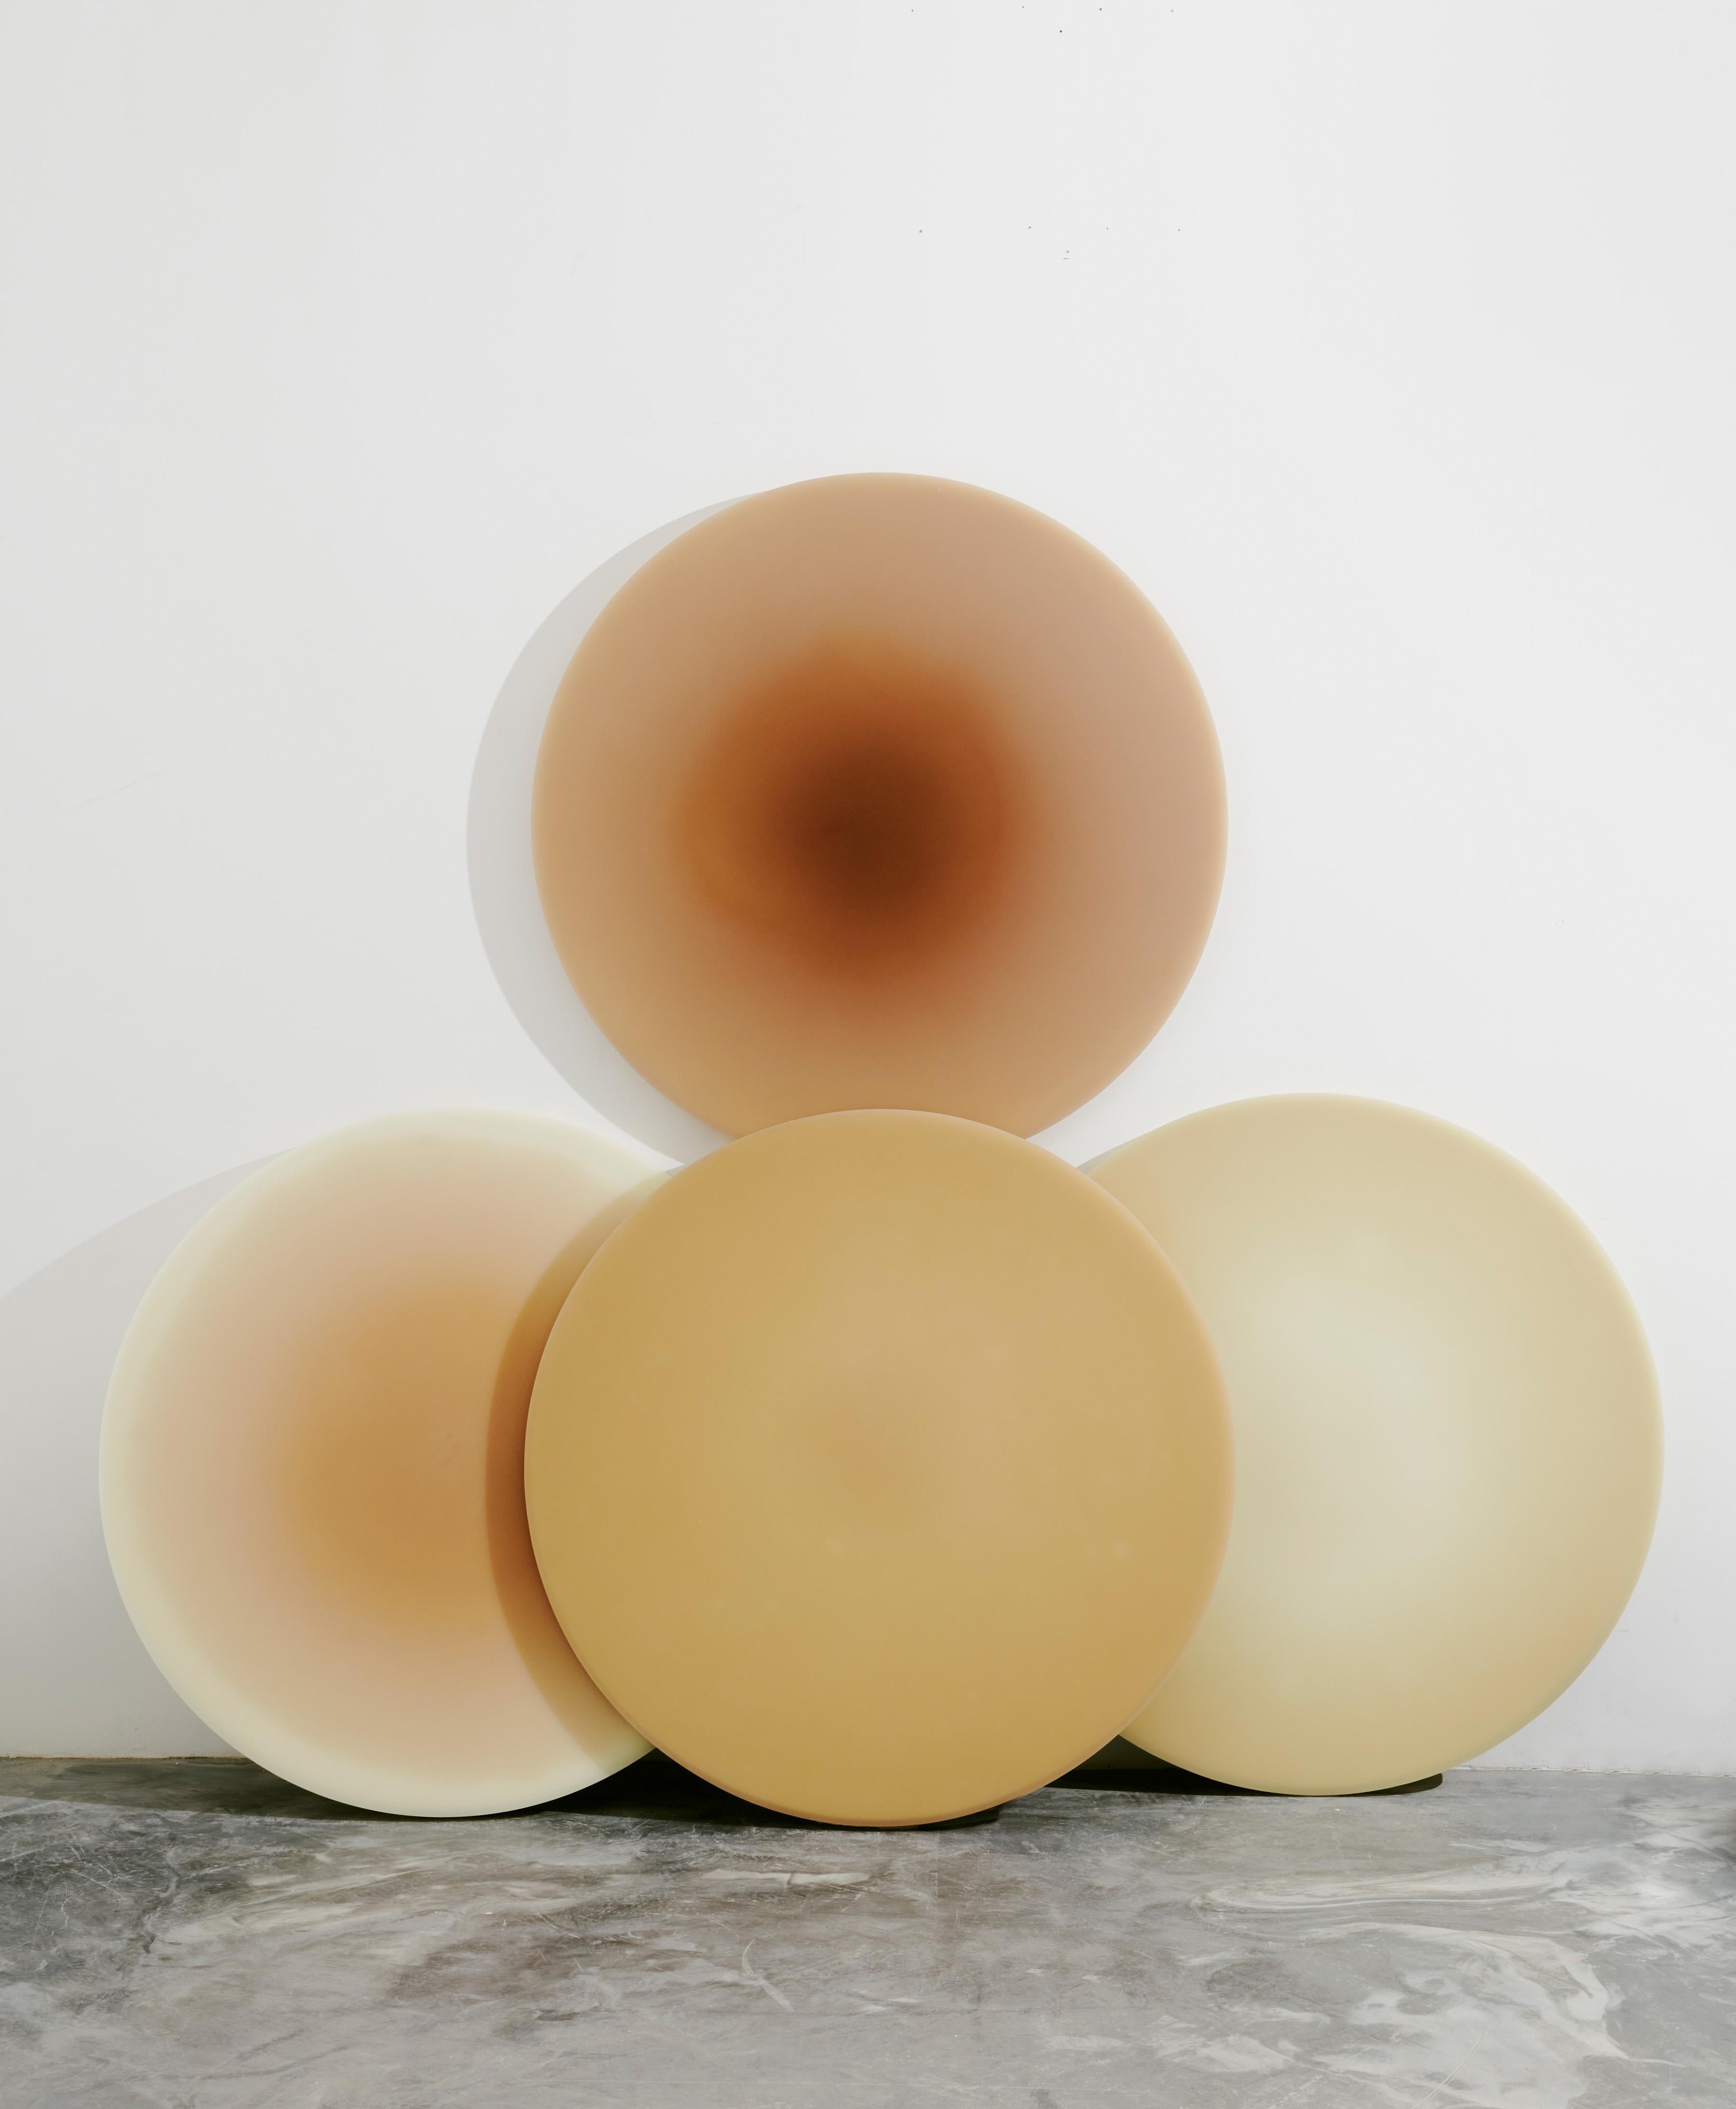 Tone halo V by Facture
Resin, Aluminum, Wood
L 48 × W 48 × H 1.5 in
L121.92 × W121.92 × H 3.81cm


A large circular wall object features a soothing hue transitioning from a brownish nude tone to a medium nude tone. The shifting saturation levels